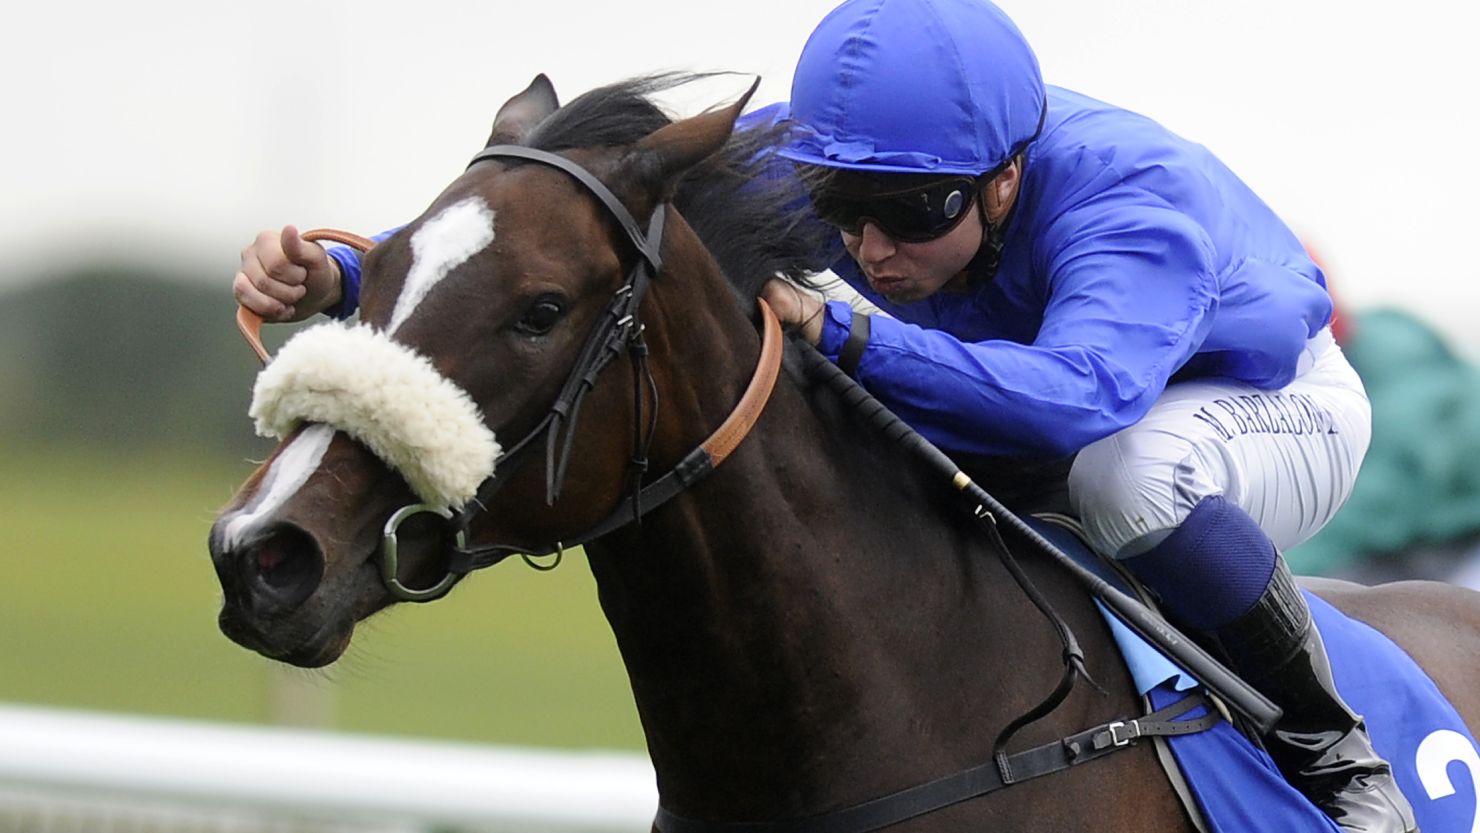 Top filly Certify is one of the Godolphin horses found to have been given banned substances.